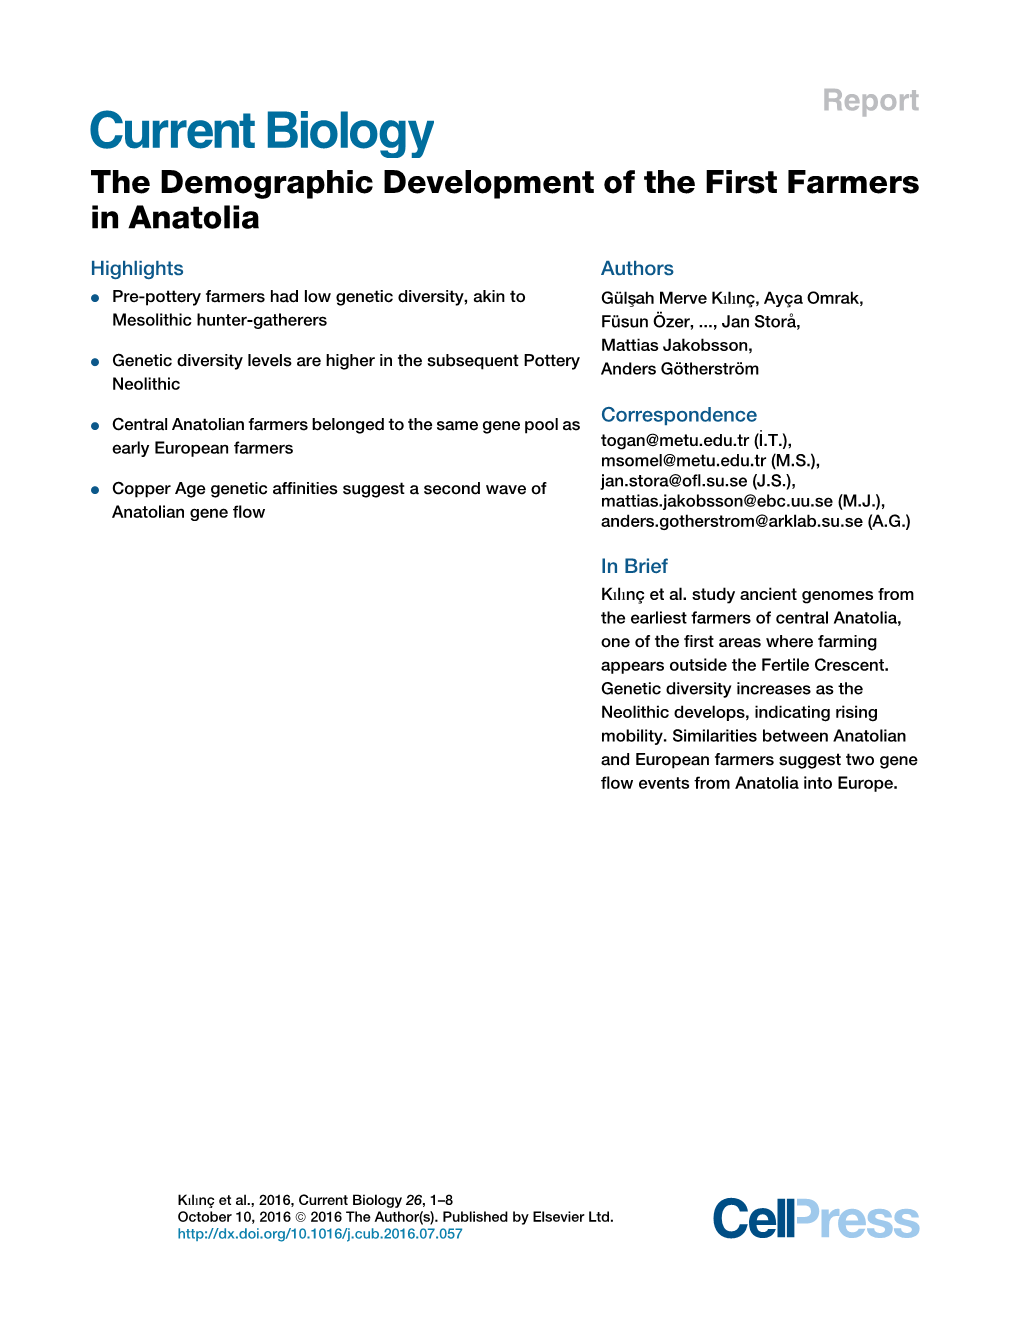 The Demographic Development of the First Farmers in Anatolia